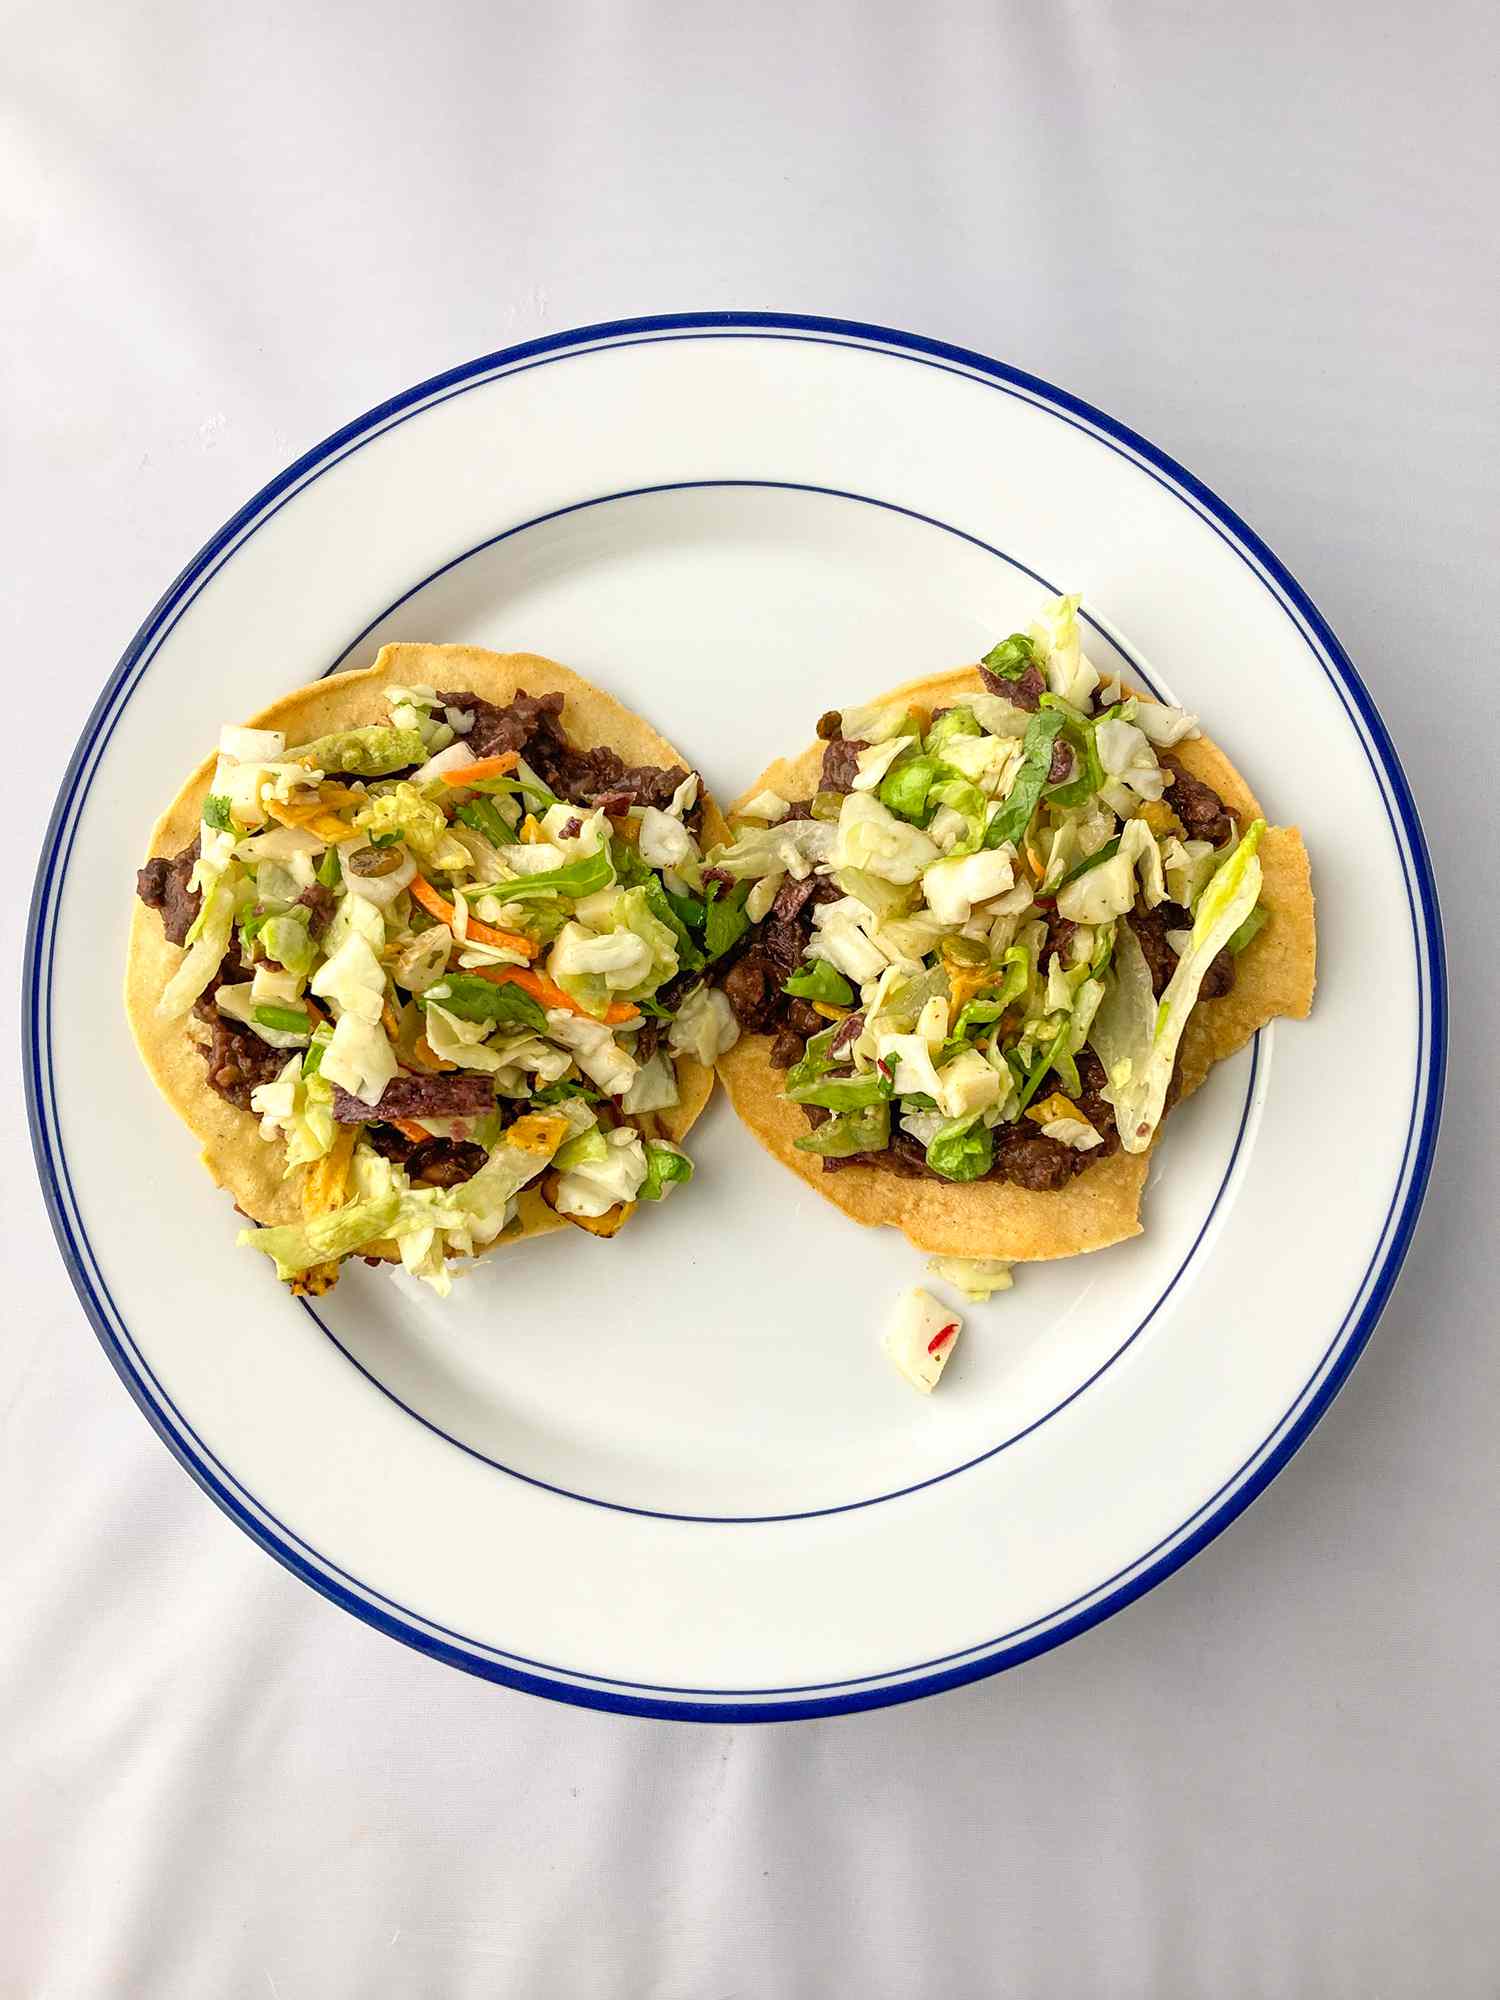 two tostadas on a white plate with a blue rim